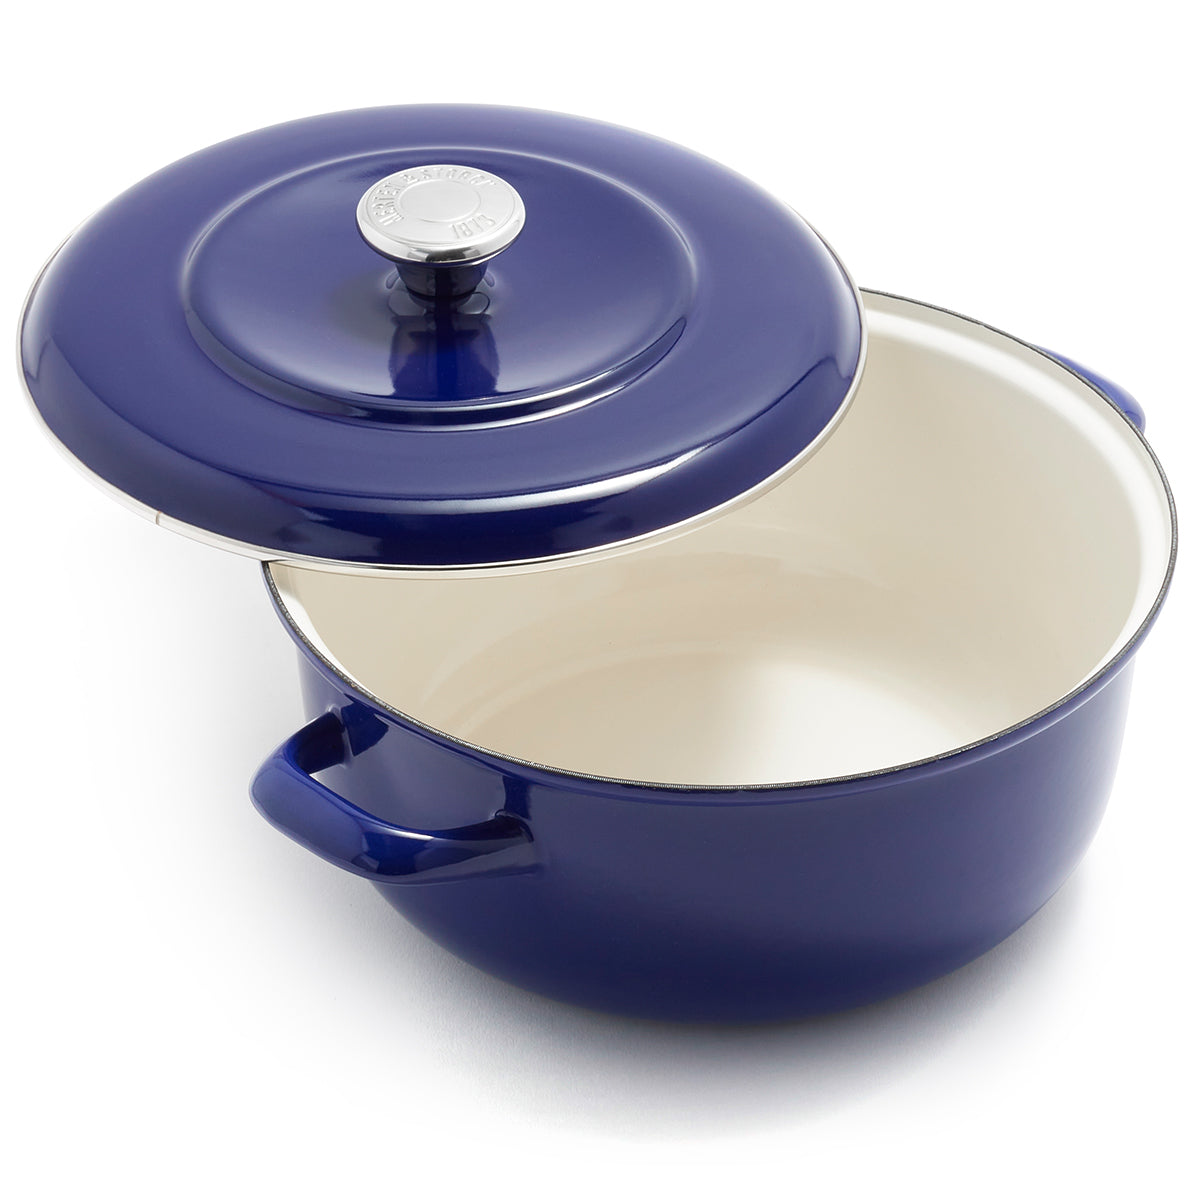 Cast Iron Dutch Oven with Lid-3 Quart Enamel Coated Pot for Oven or  Stovetop-For Soup Stew, 1 unit - Metro Market